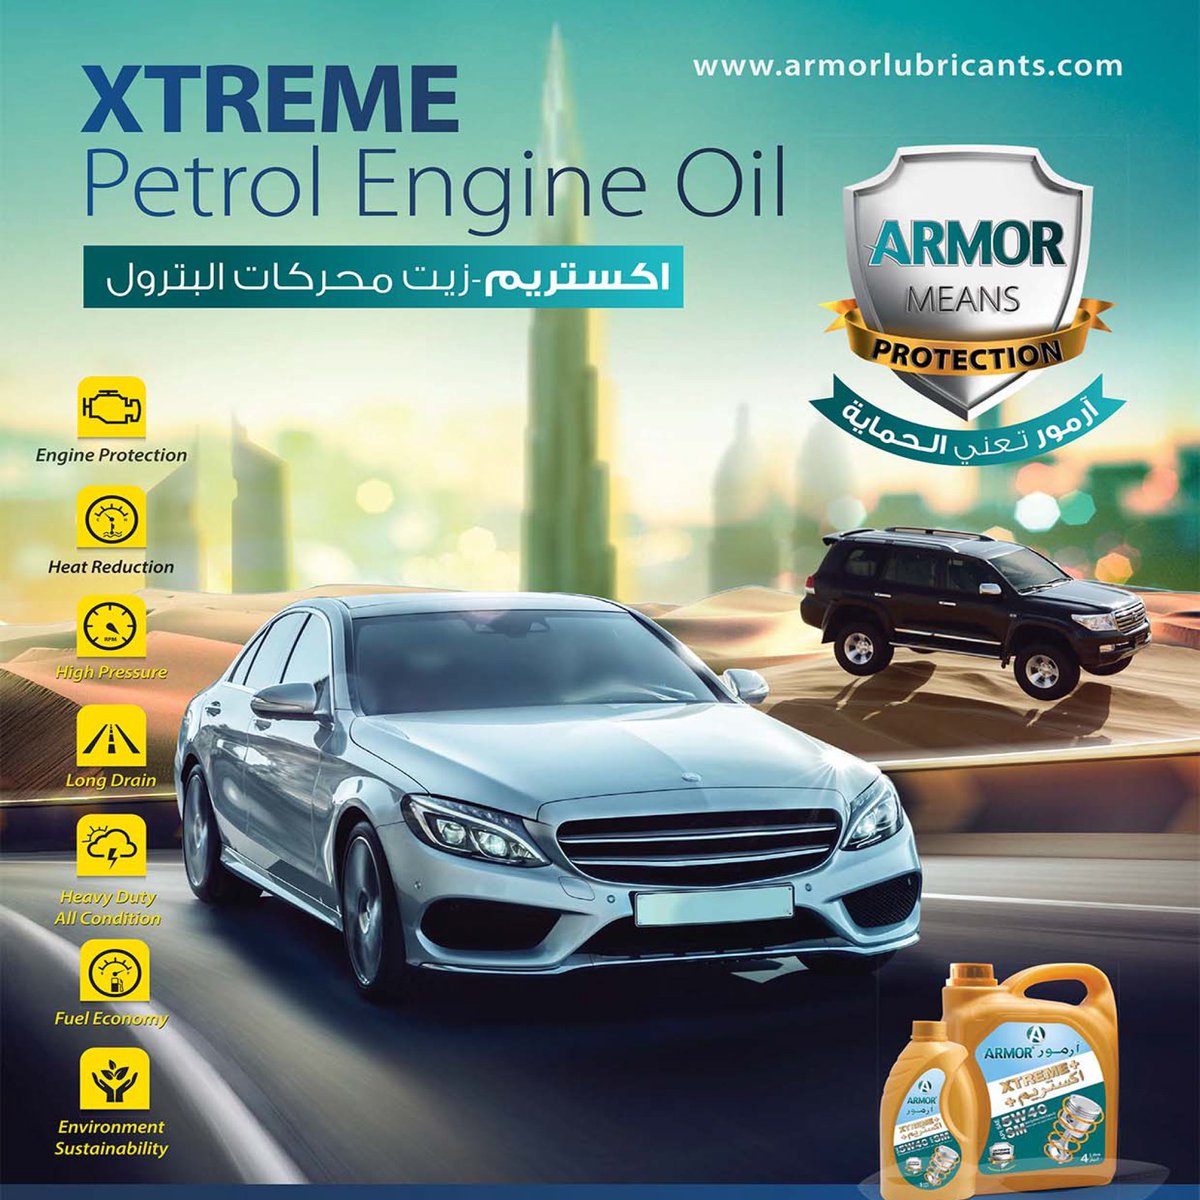 Armor #Xtreme formulated with #special #additives #Quality #Oil to deliver high Petrol Engine Oil that protects your equipments
#ArmorLubricants #lubricants #Engineoil #petrol #Cars #Lube #Automotive #Motoroil #Synthetic #Industrial #API #AutomotiveLubricants#Protection #Economy